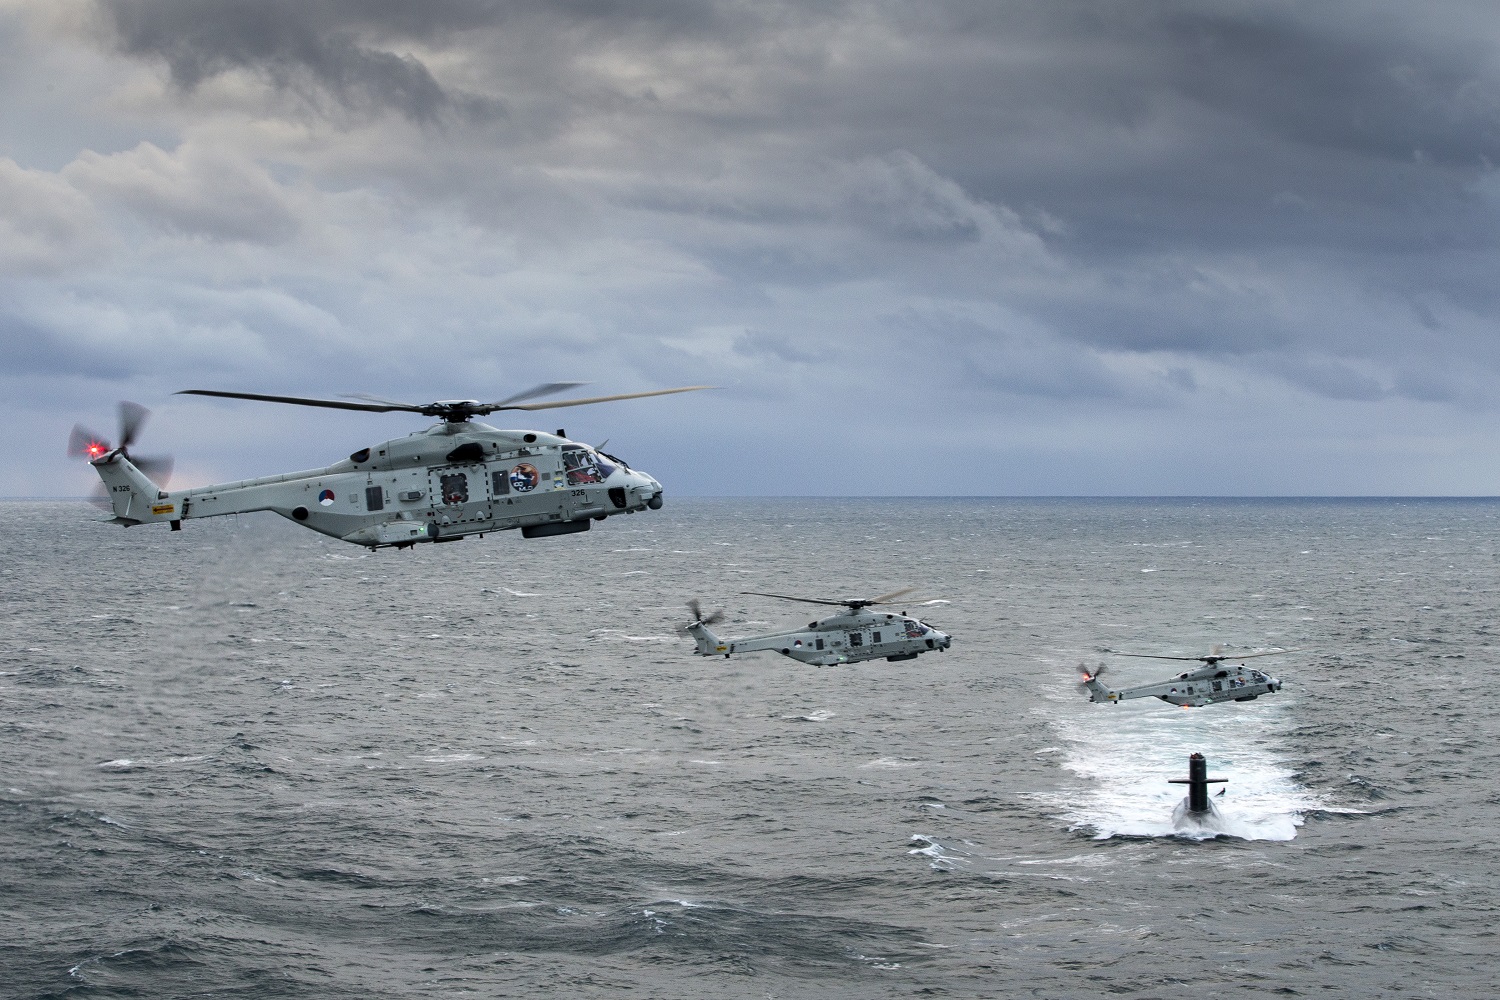 Royal Netherlands Navy to Upgrade Fleet of NH90 Maritime Helicopters